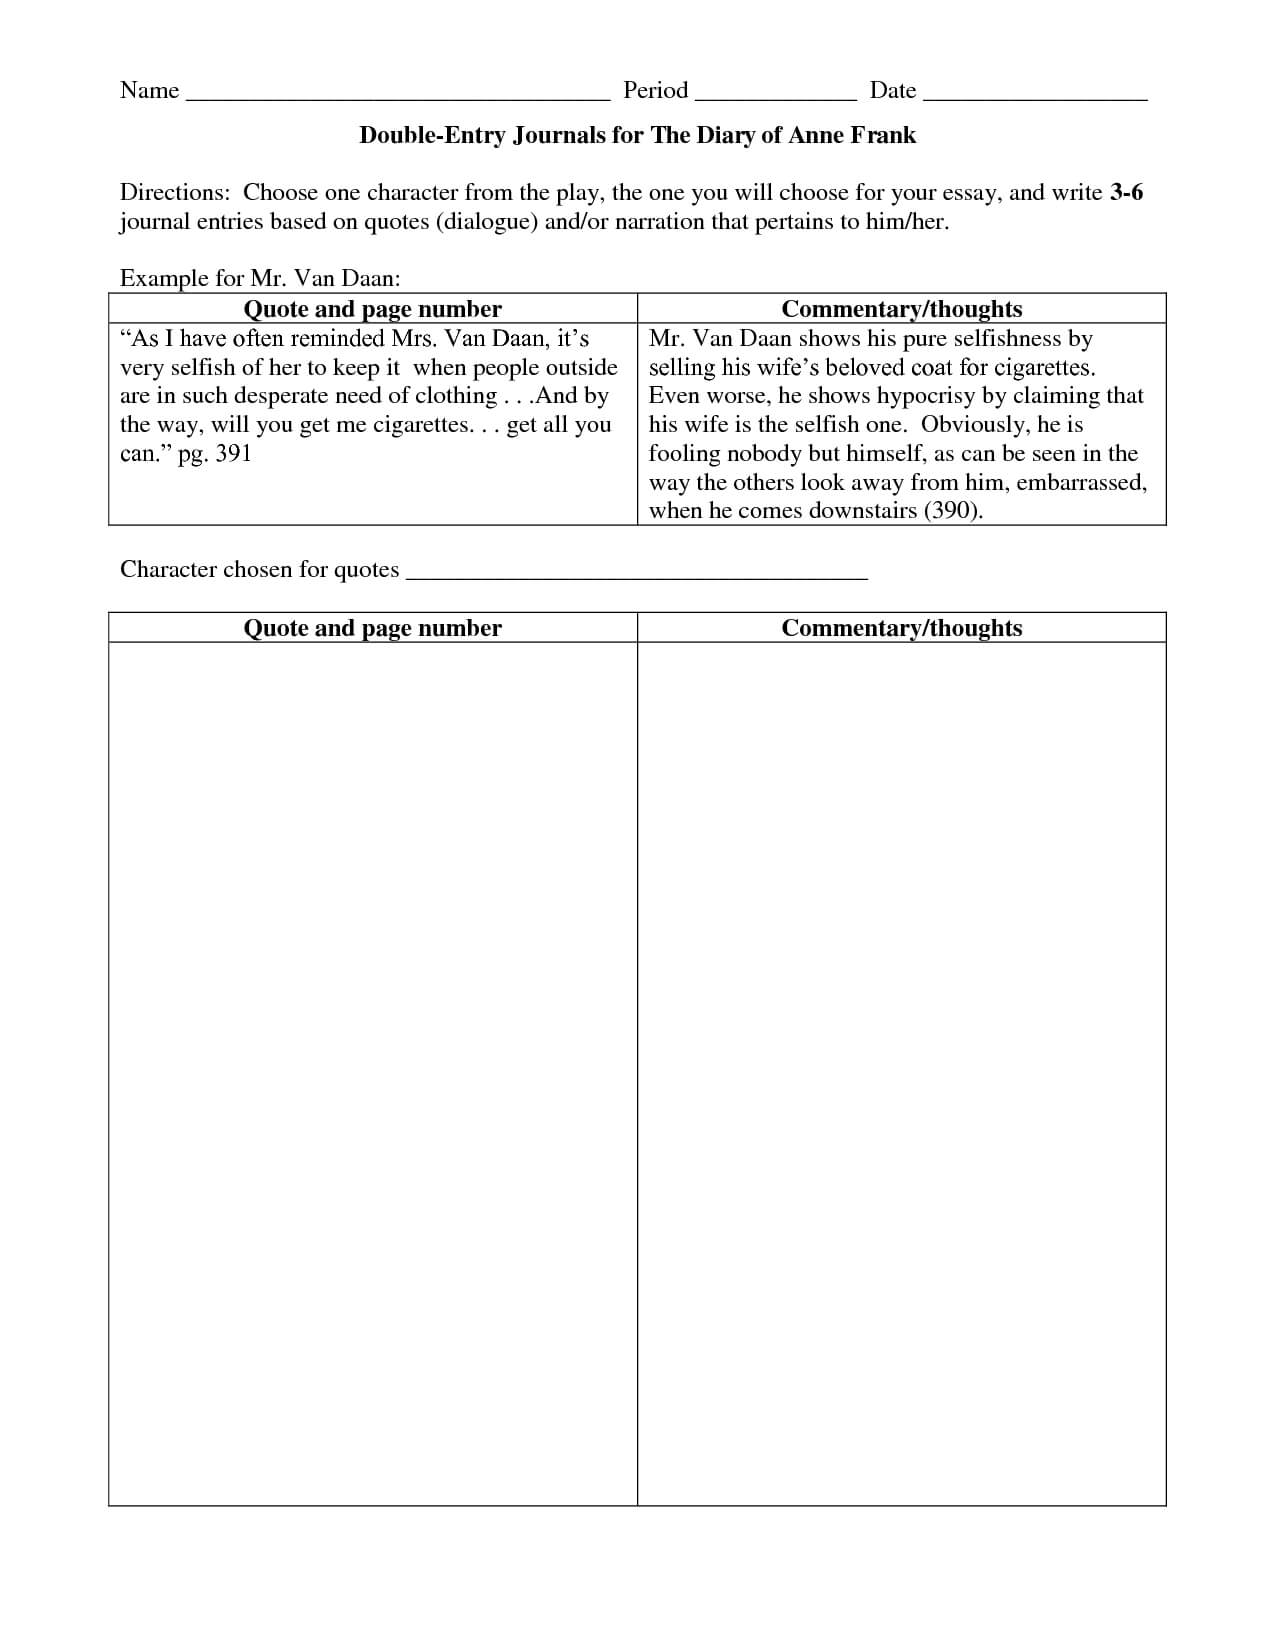 Double Entry Journals Examples | Double Entry Journal Throughout Double Entry Journal Template For Word